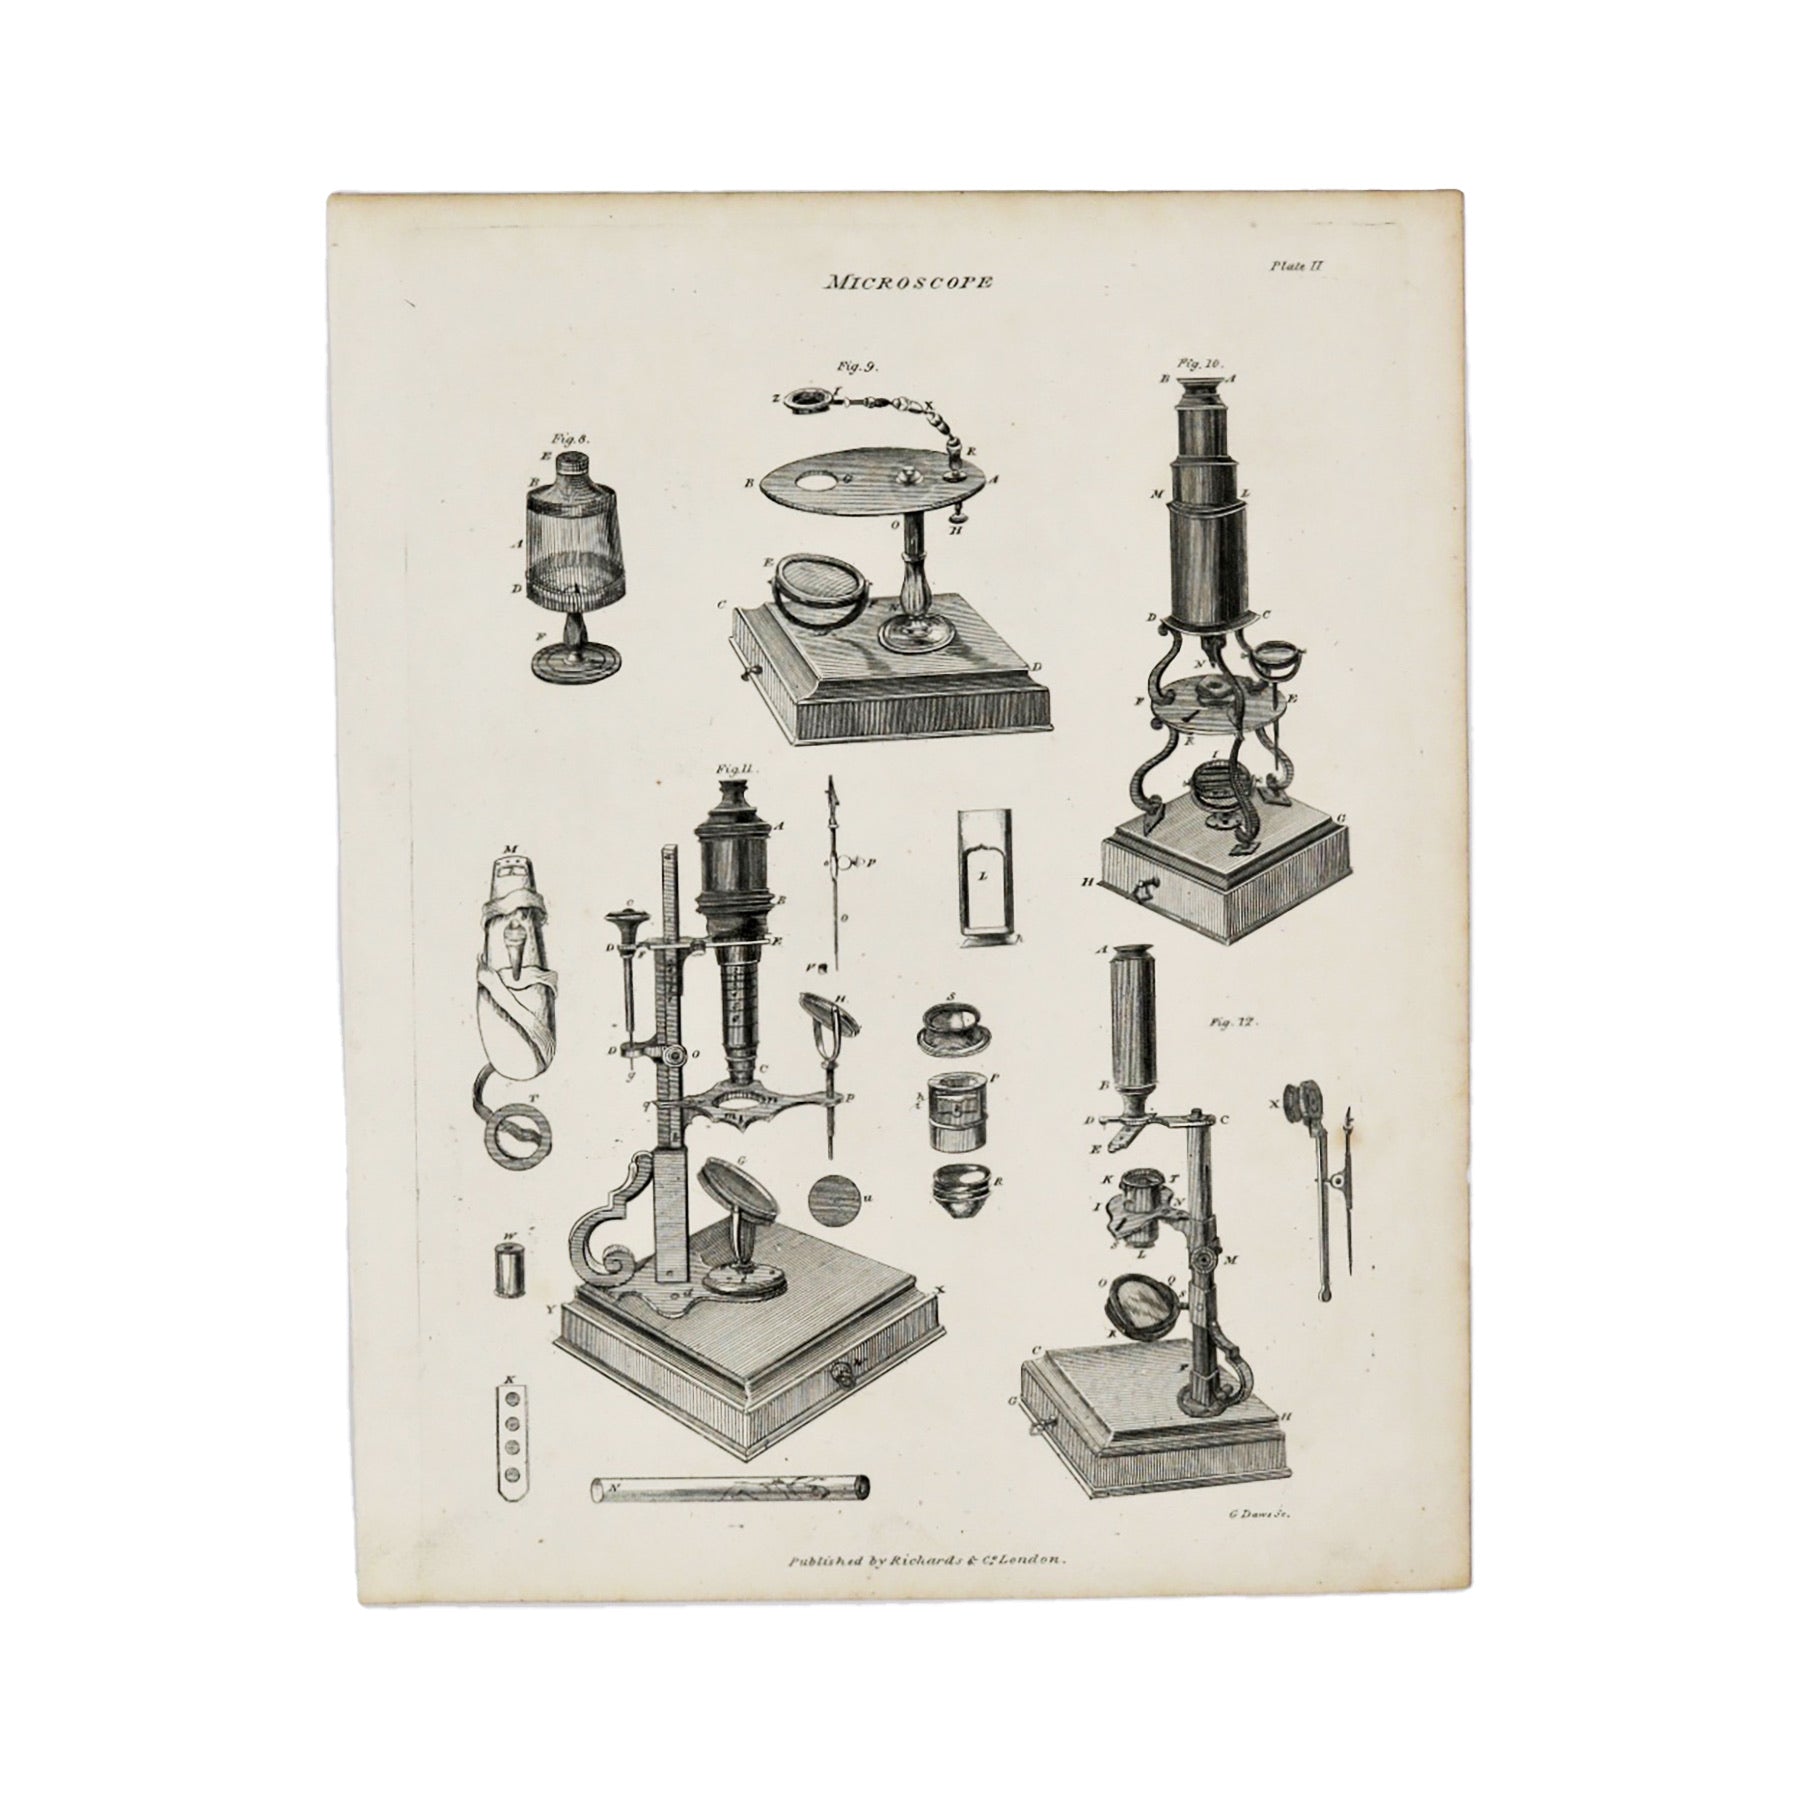 Microscope Plate II  Antique 1820 Engraving from "The Modern Encyclopedia: The Latest Discoveries in each Department of Knowledge."  1820s etching depicting cross sections of early microscopes.  Measures 10.5 x 8.25 inches